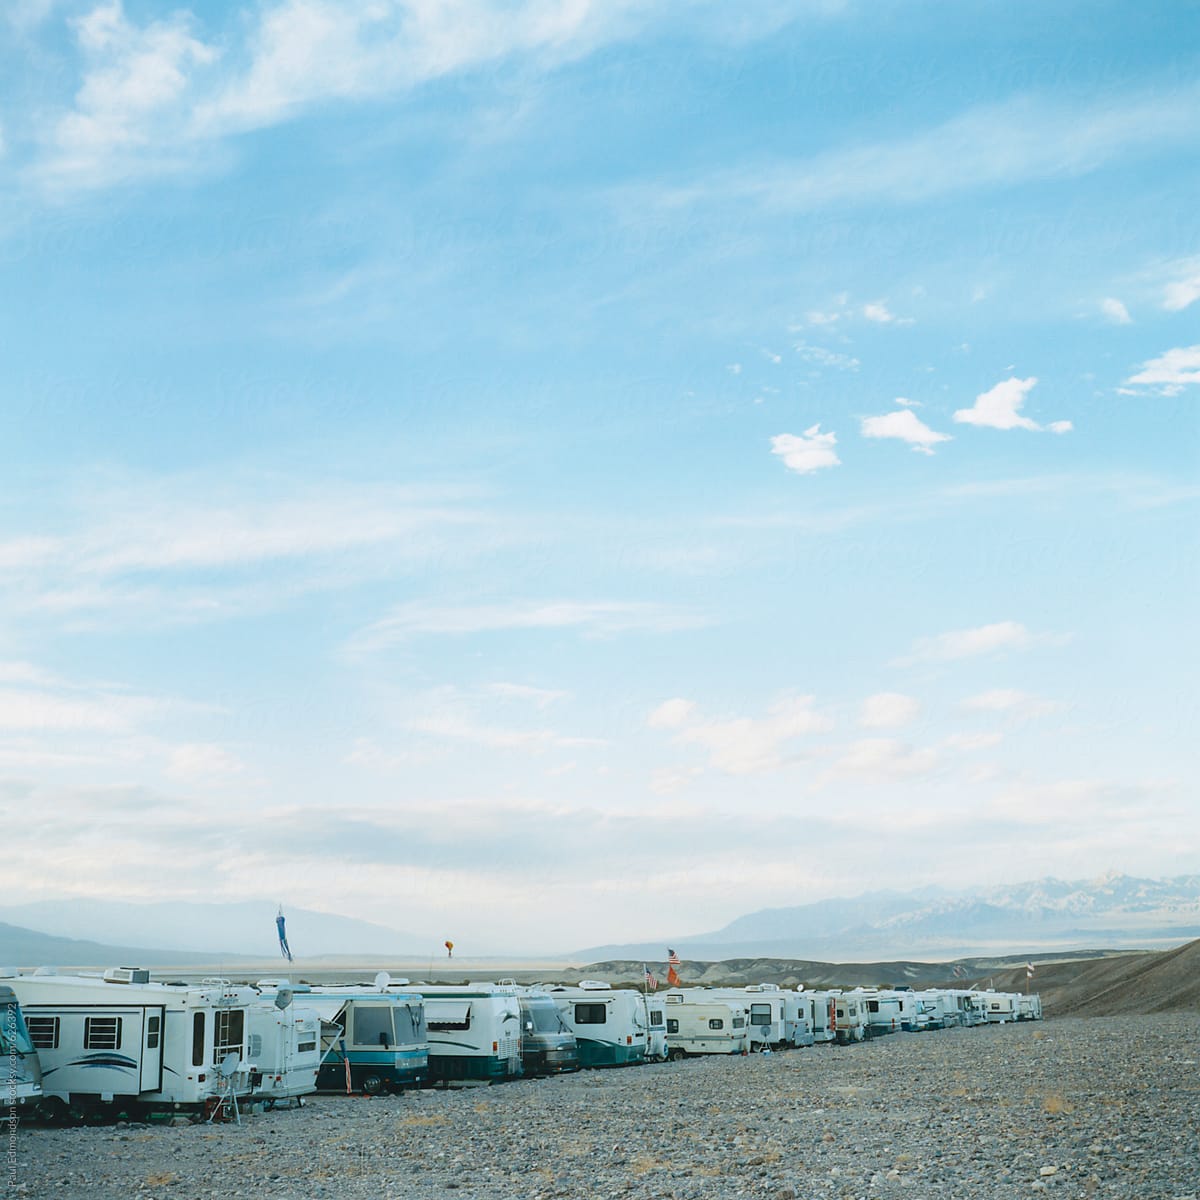 Rows of parked RV\'s in Death Valley NP, CA